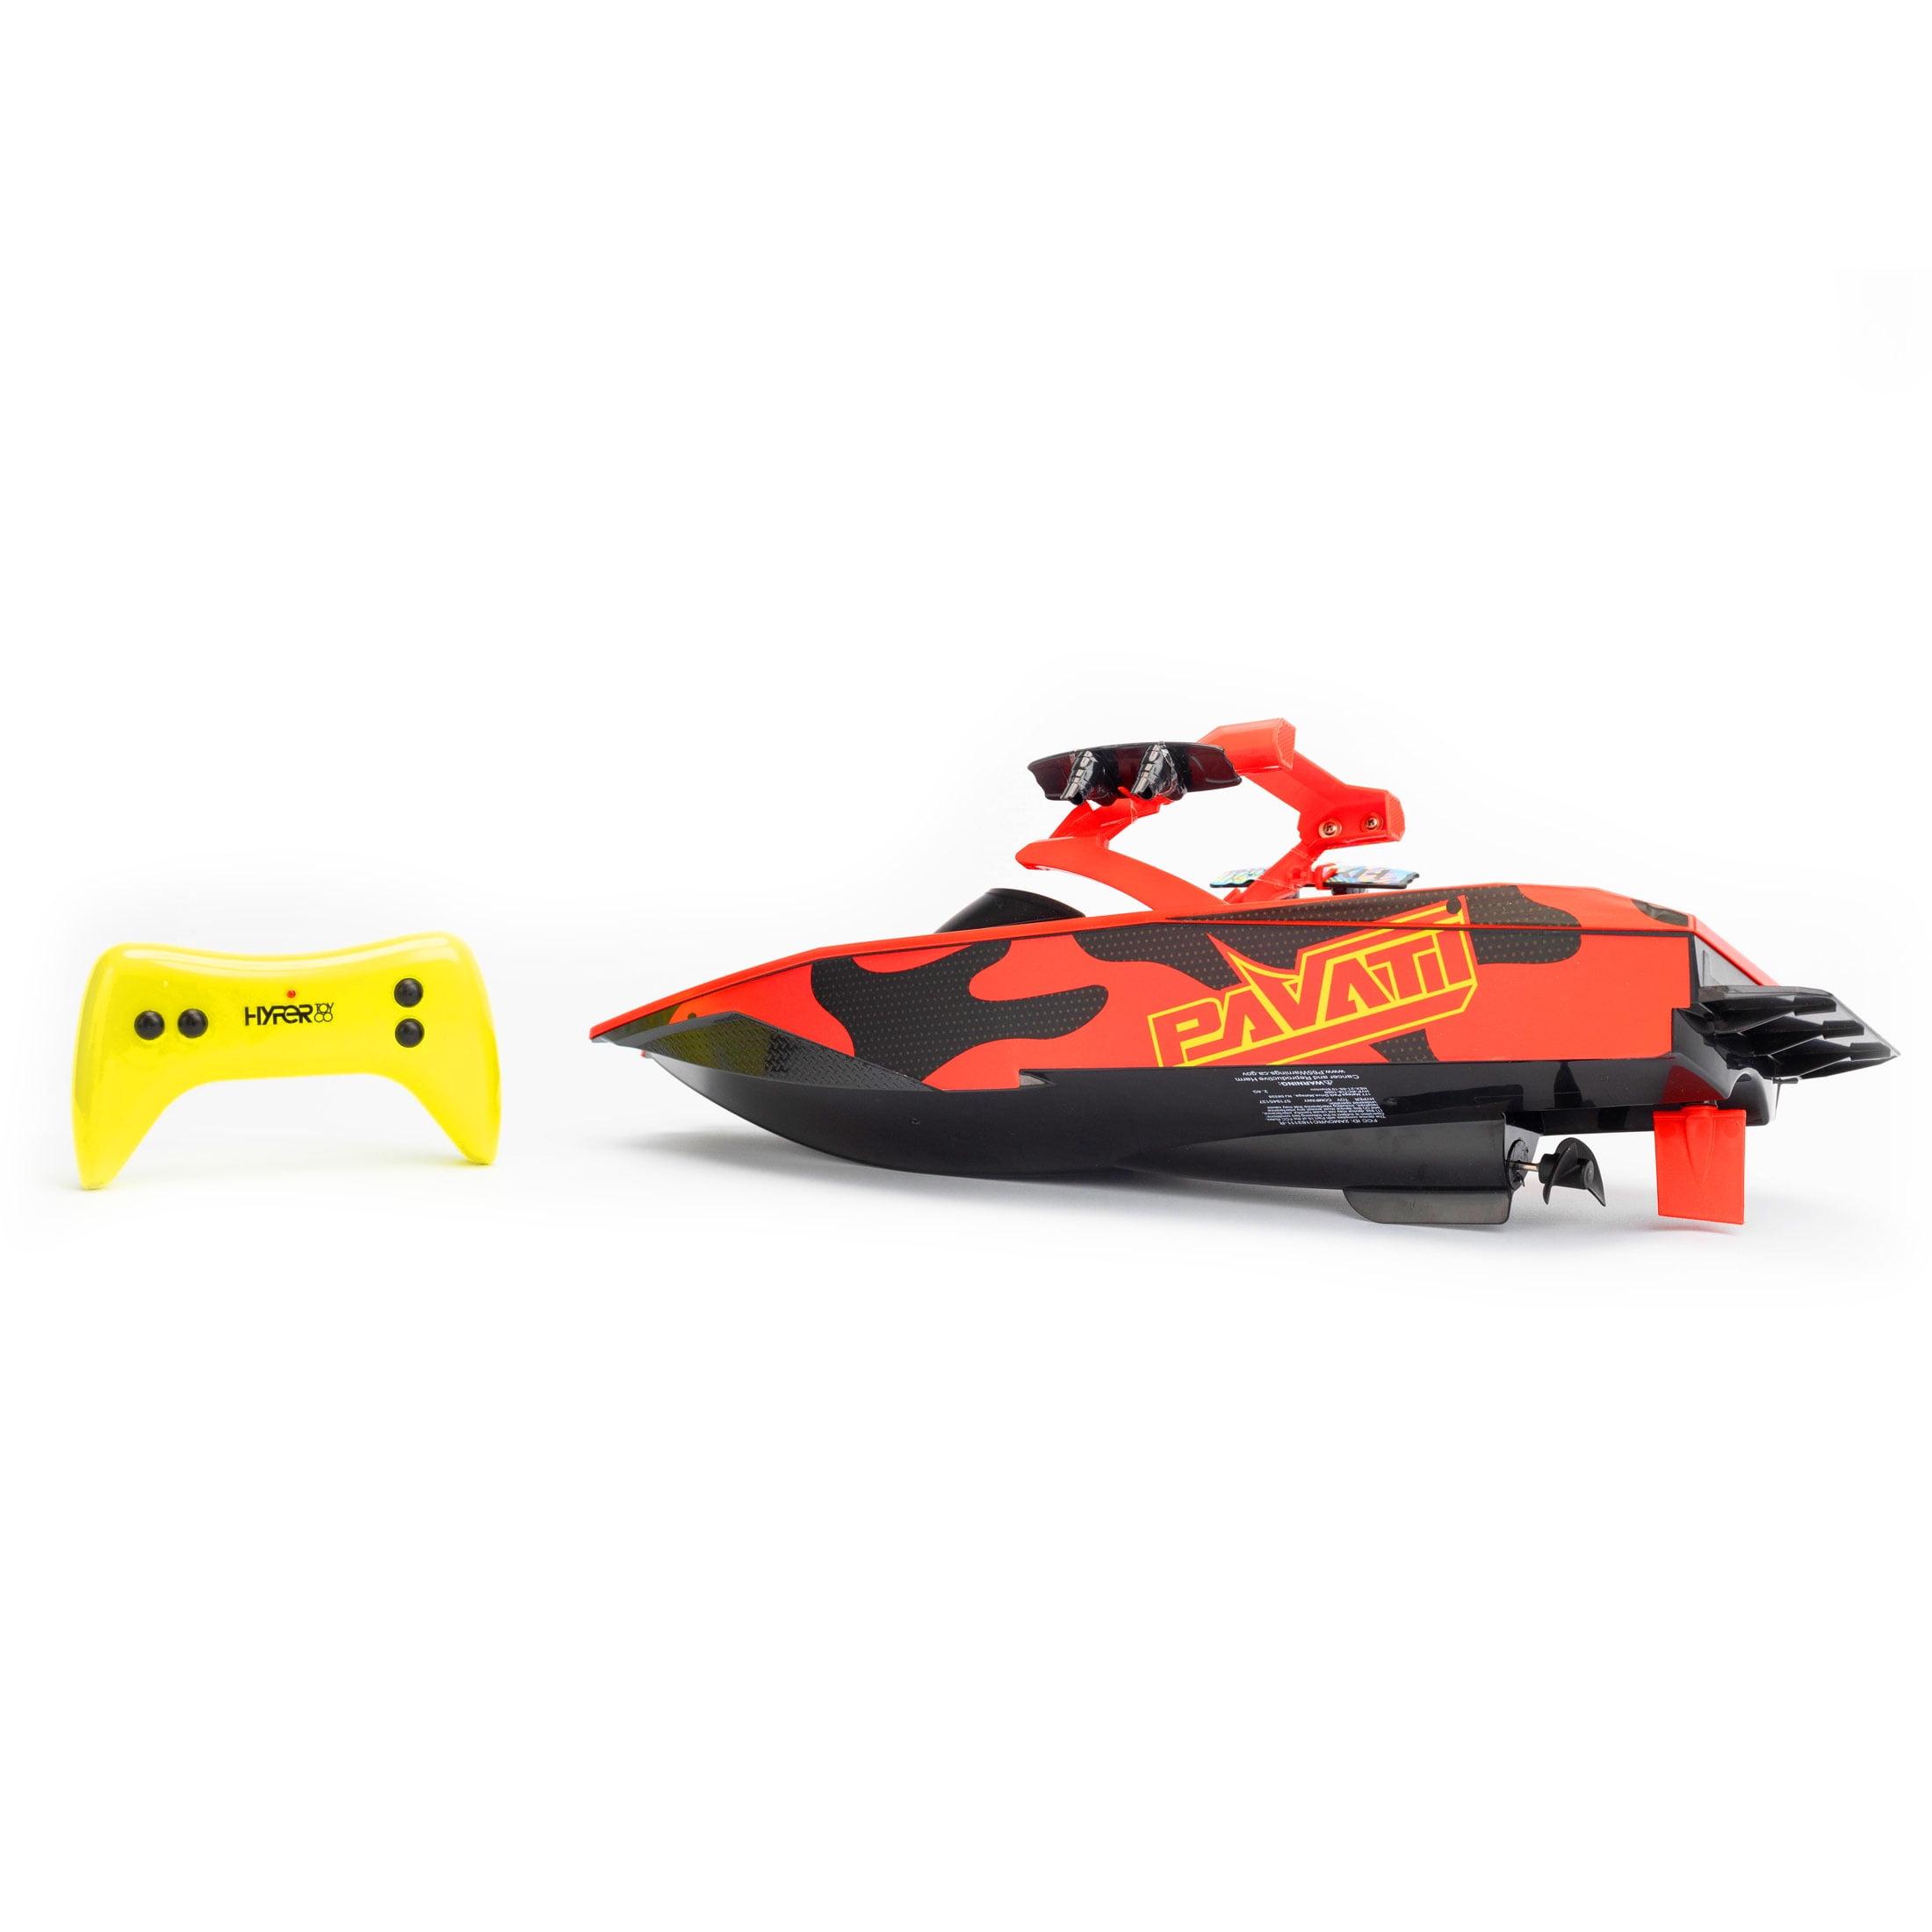 Hyper Toy Rc Wakeboard Boat: Operating a Hyper Toy RC Wakeboard Boat.